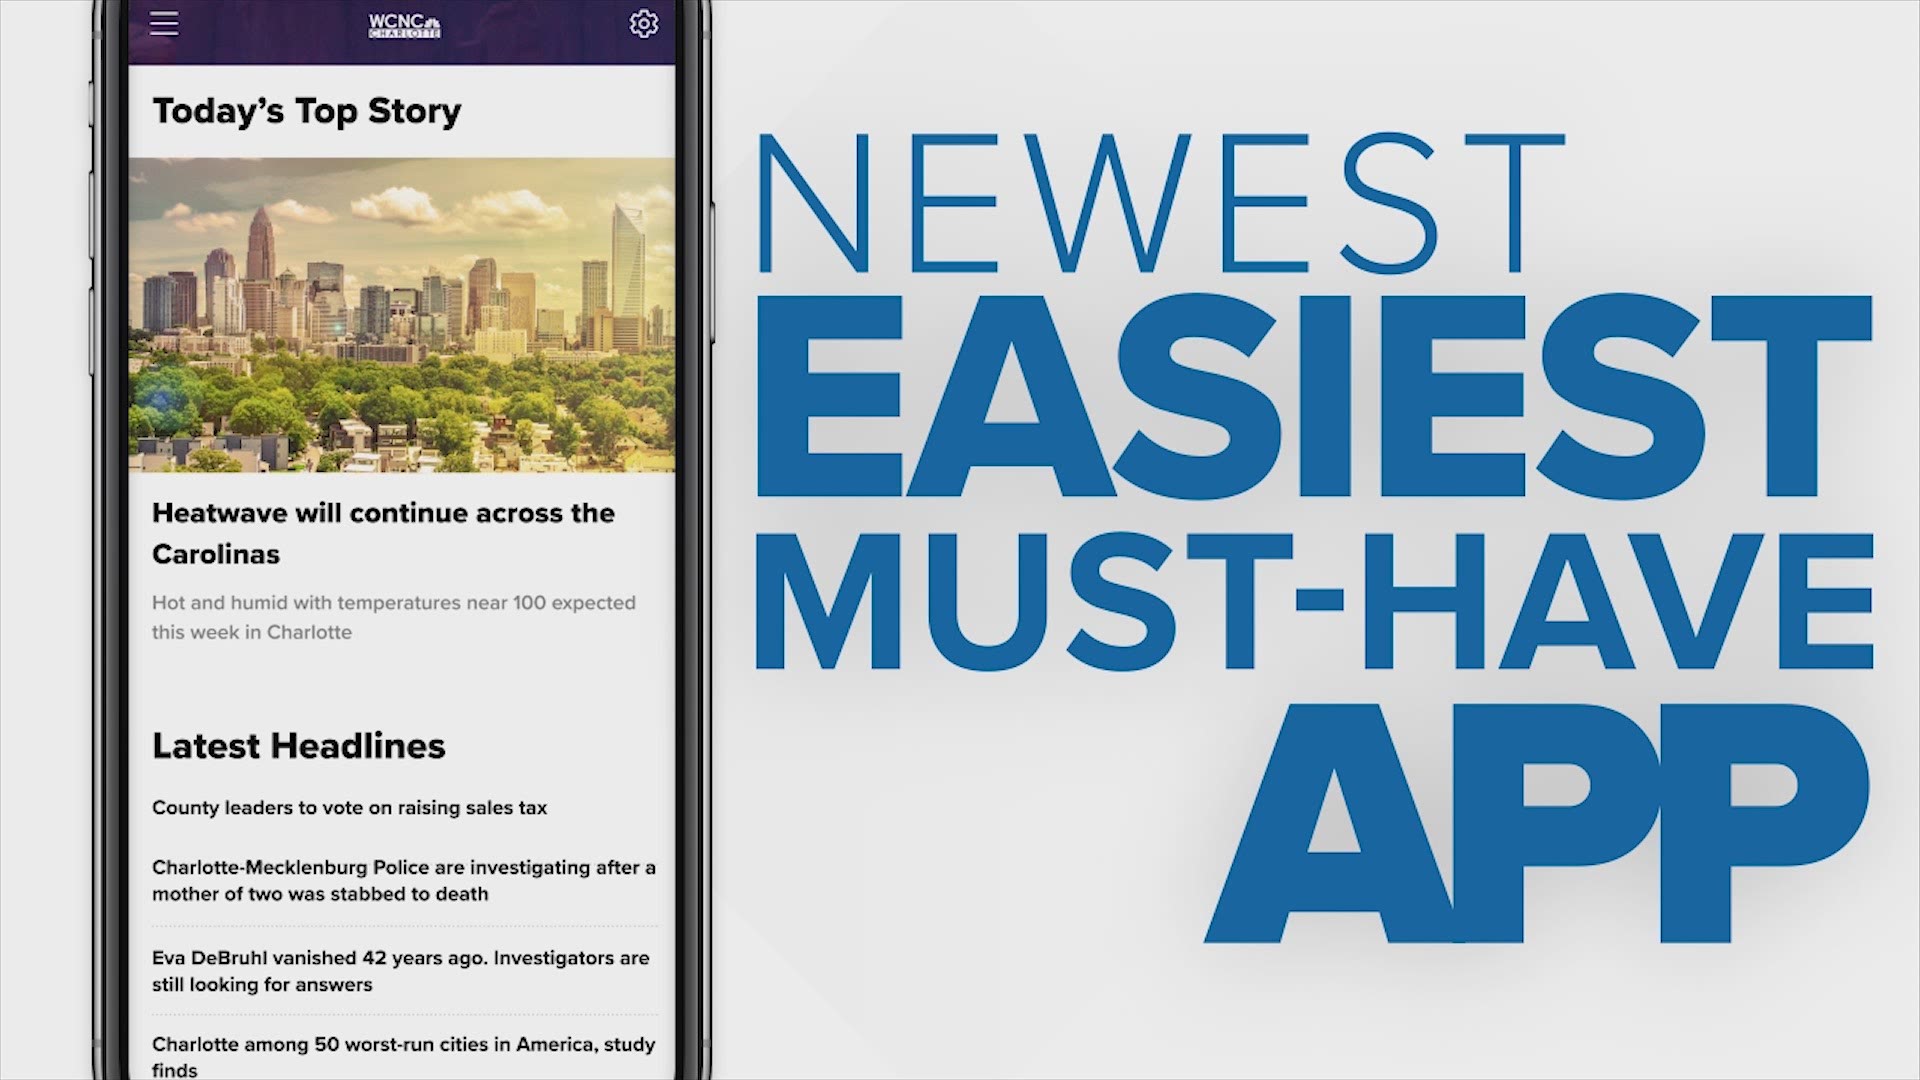 Customize the news you receive from the WCNC mobile app by setting your favorite topics.